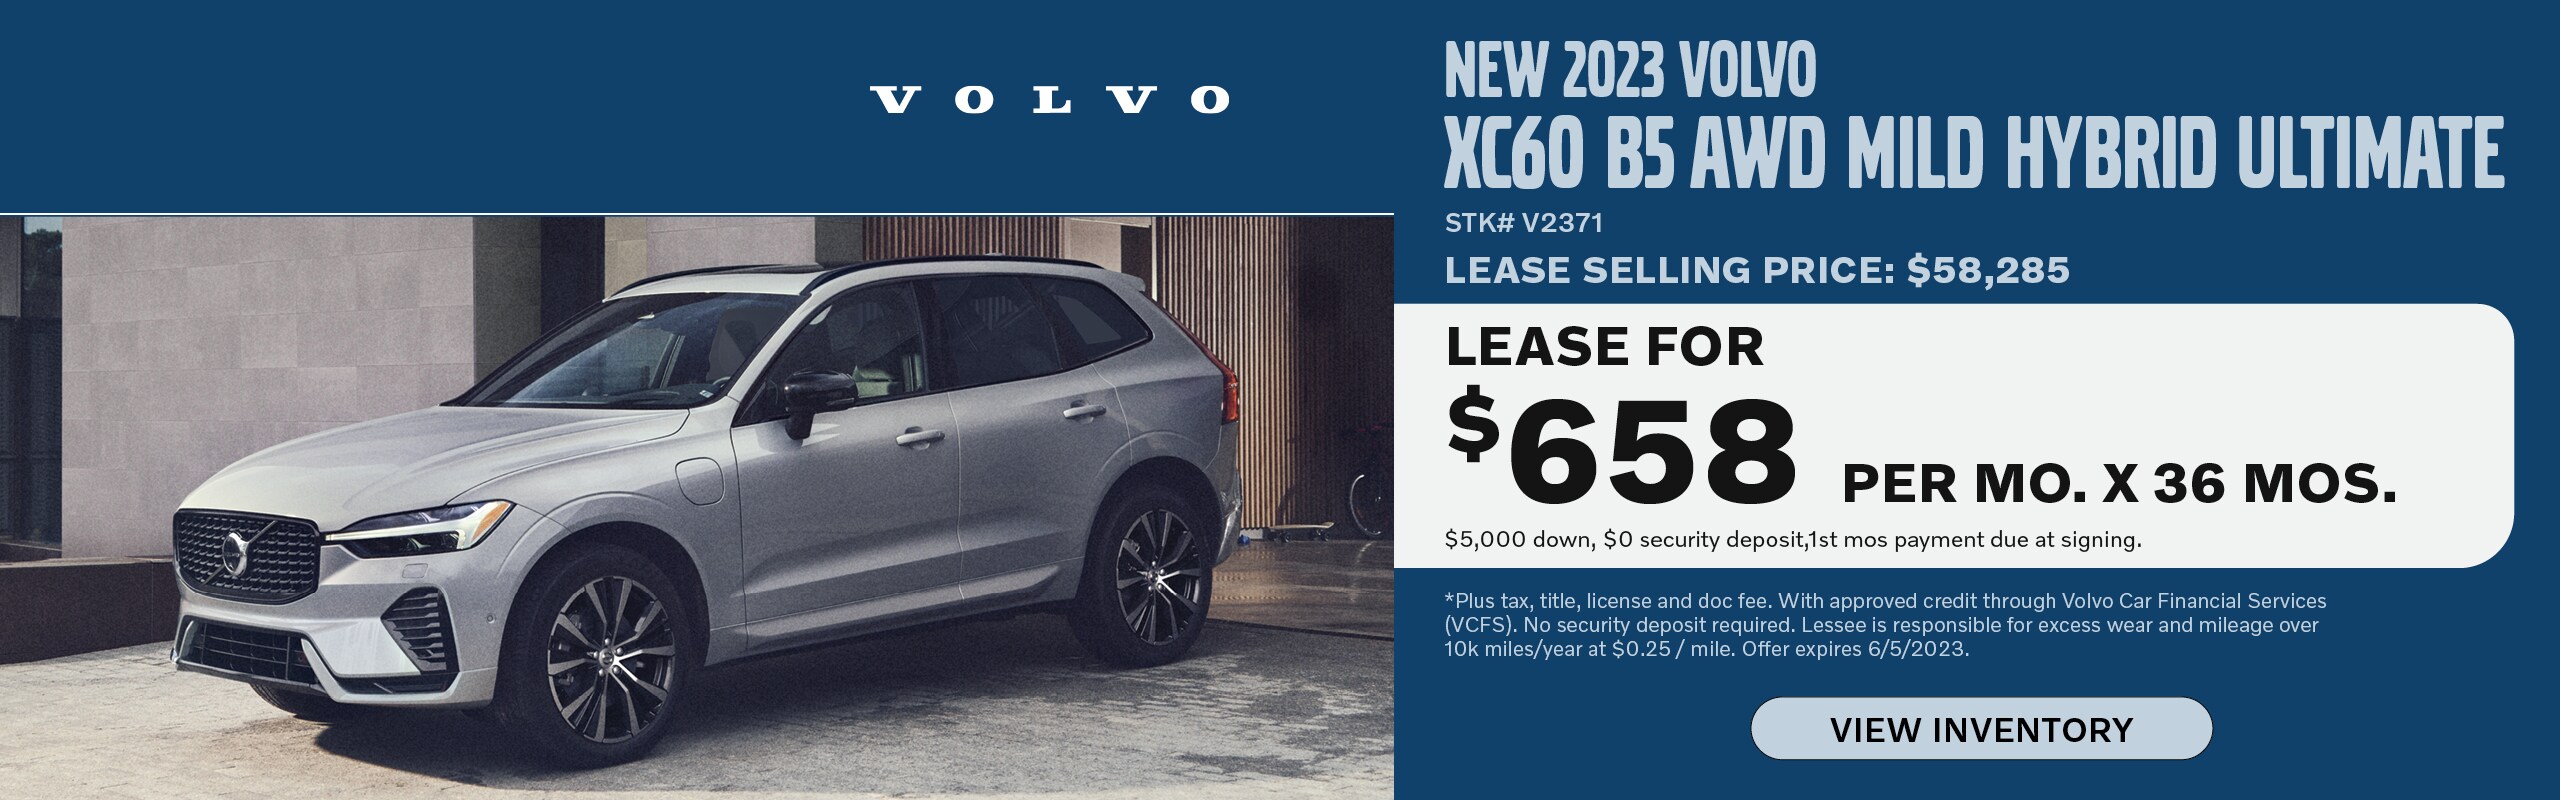 Lease a new 2023 Volvo XC60 B5 AWD Mild Hybrid Ultimate for $658 per month for 36 months. $5,000 down, $0 security deposit, 1st months payment due at signing. Stock number: V2371. Lease Selling Price: $58,285